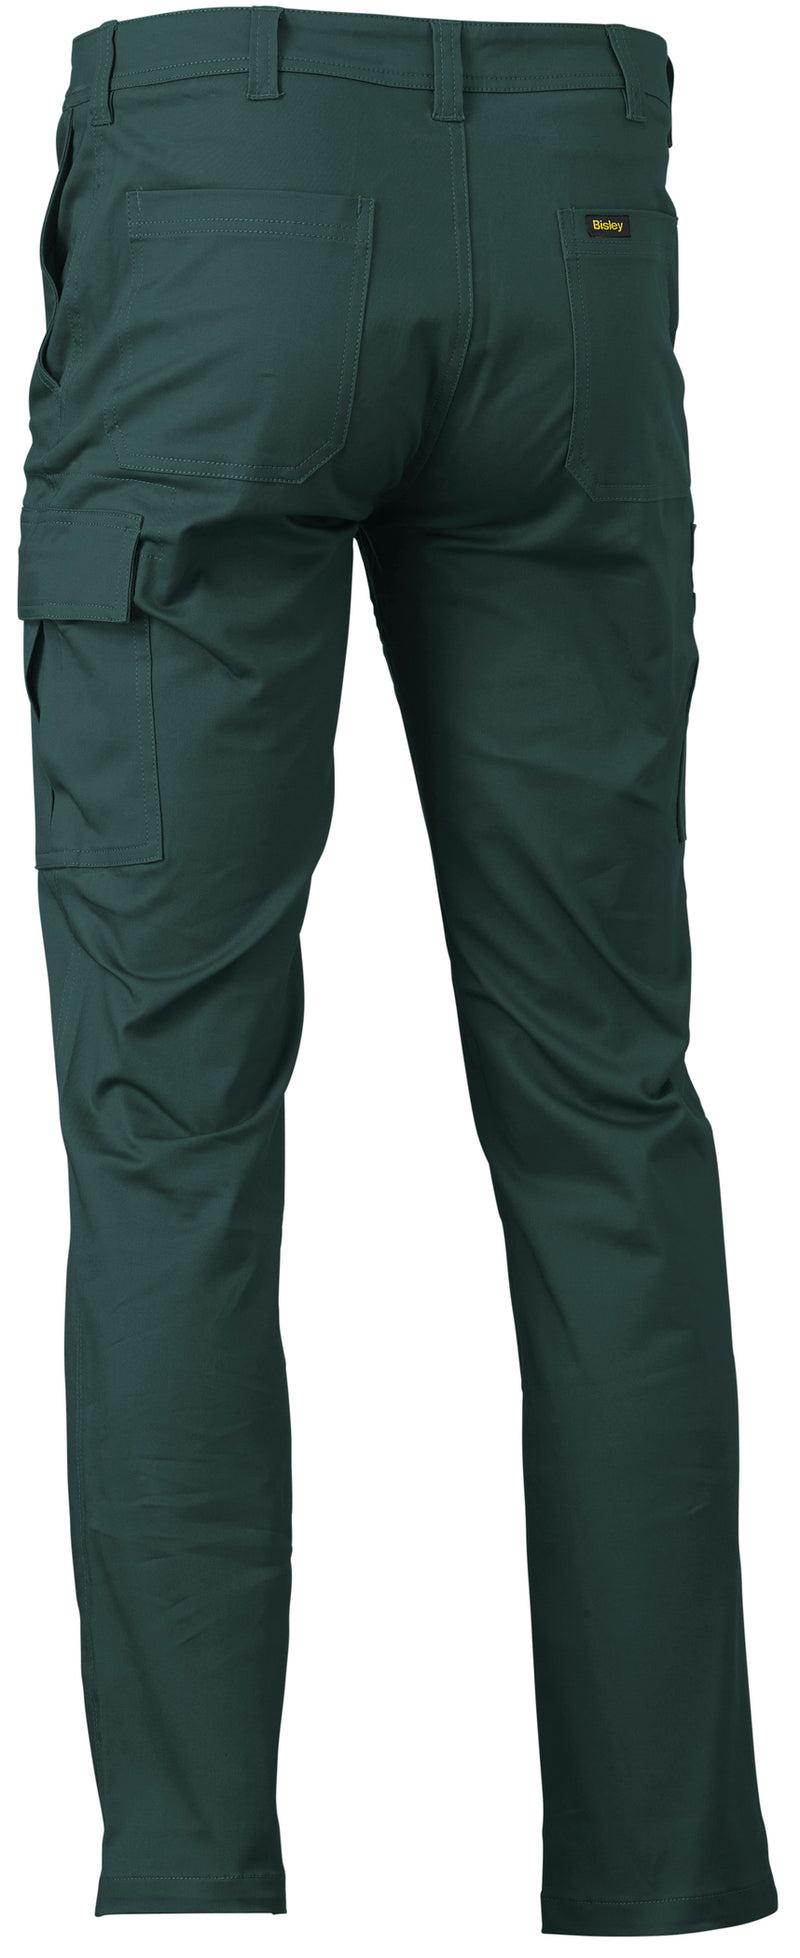 Load image into Gallery viewer, Wholesale BPC6008 Bisley Stretch Cotton Drill Cargo Pants - Long Printed or Blank
